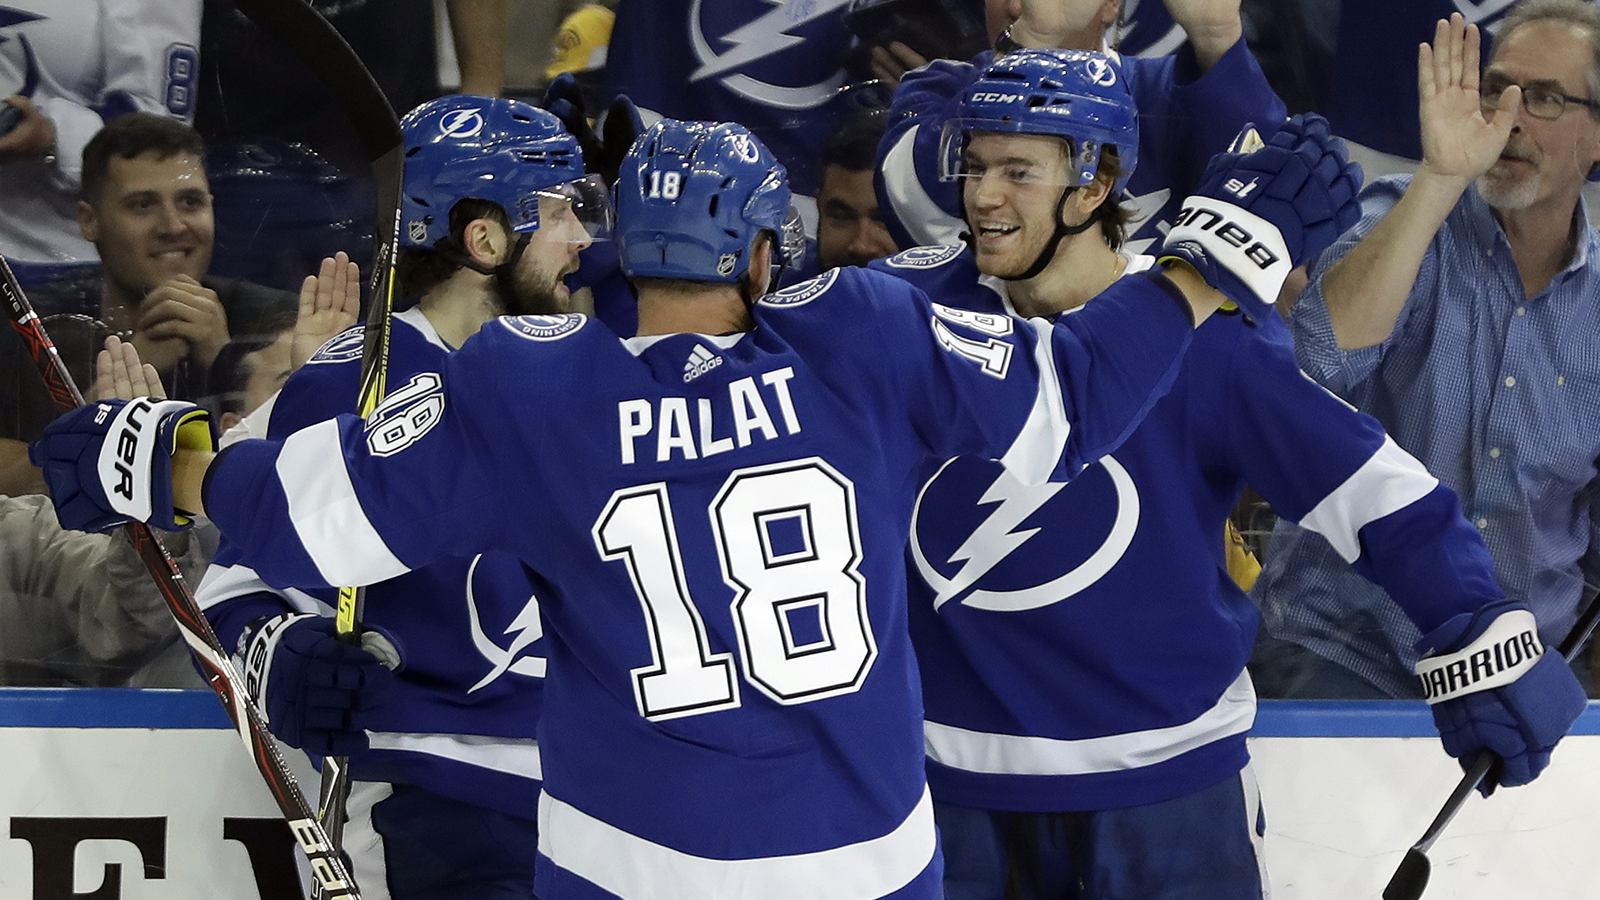 Lightning tear through Bruins to pull into tie atop Atlantic Division